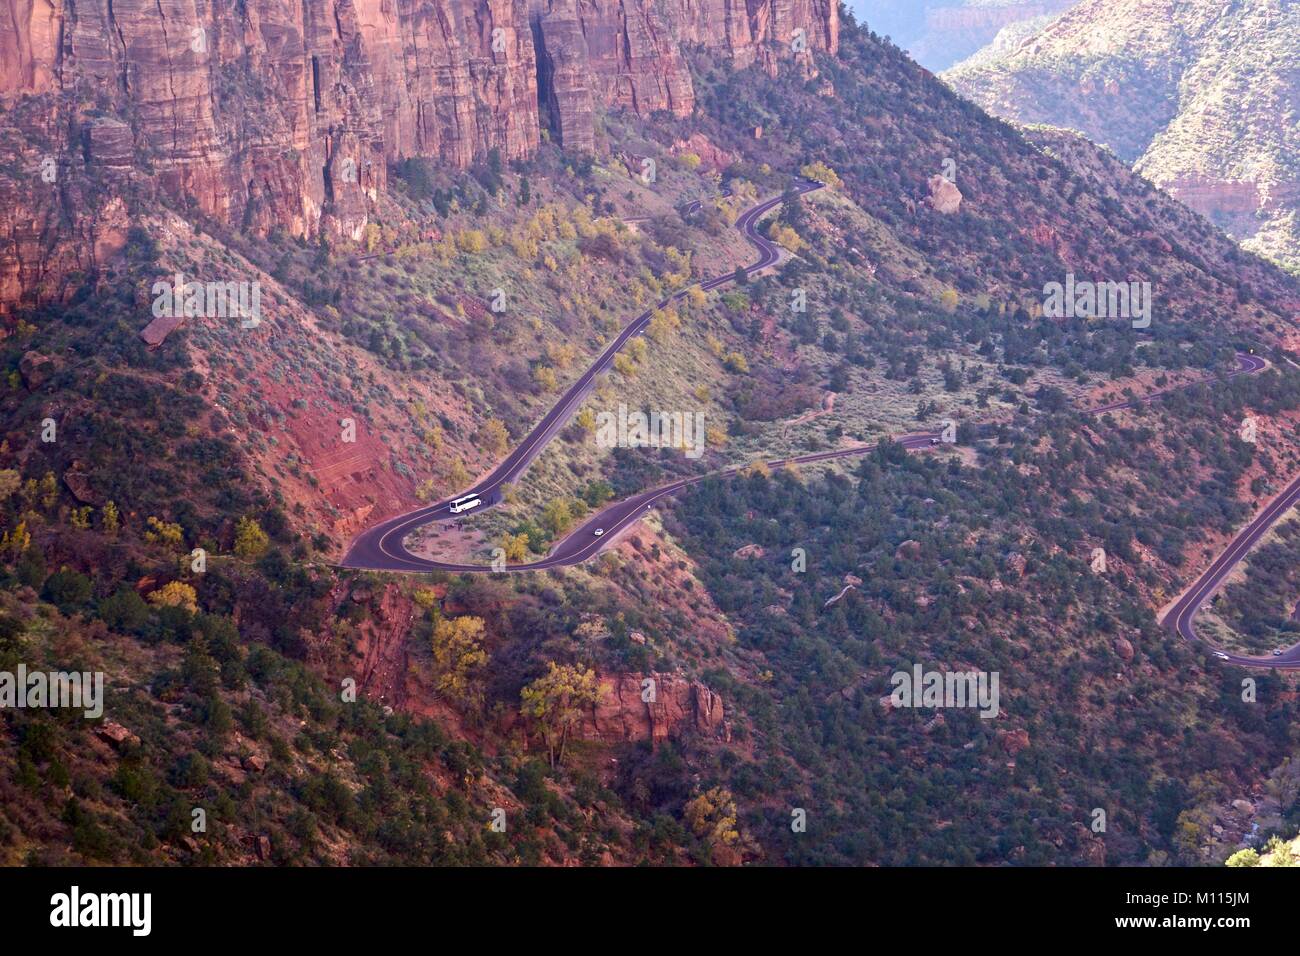 Close up of the winding road through Zion canyon from Overlook Panorama Stock Photo